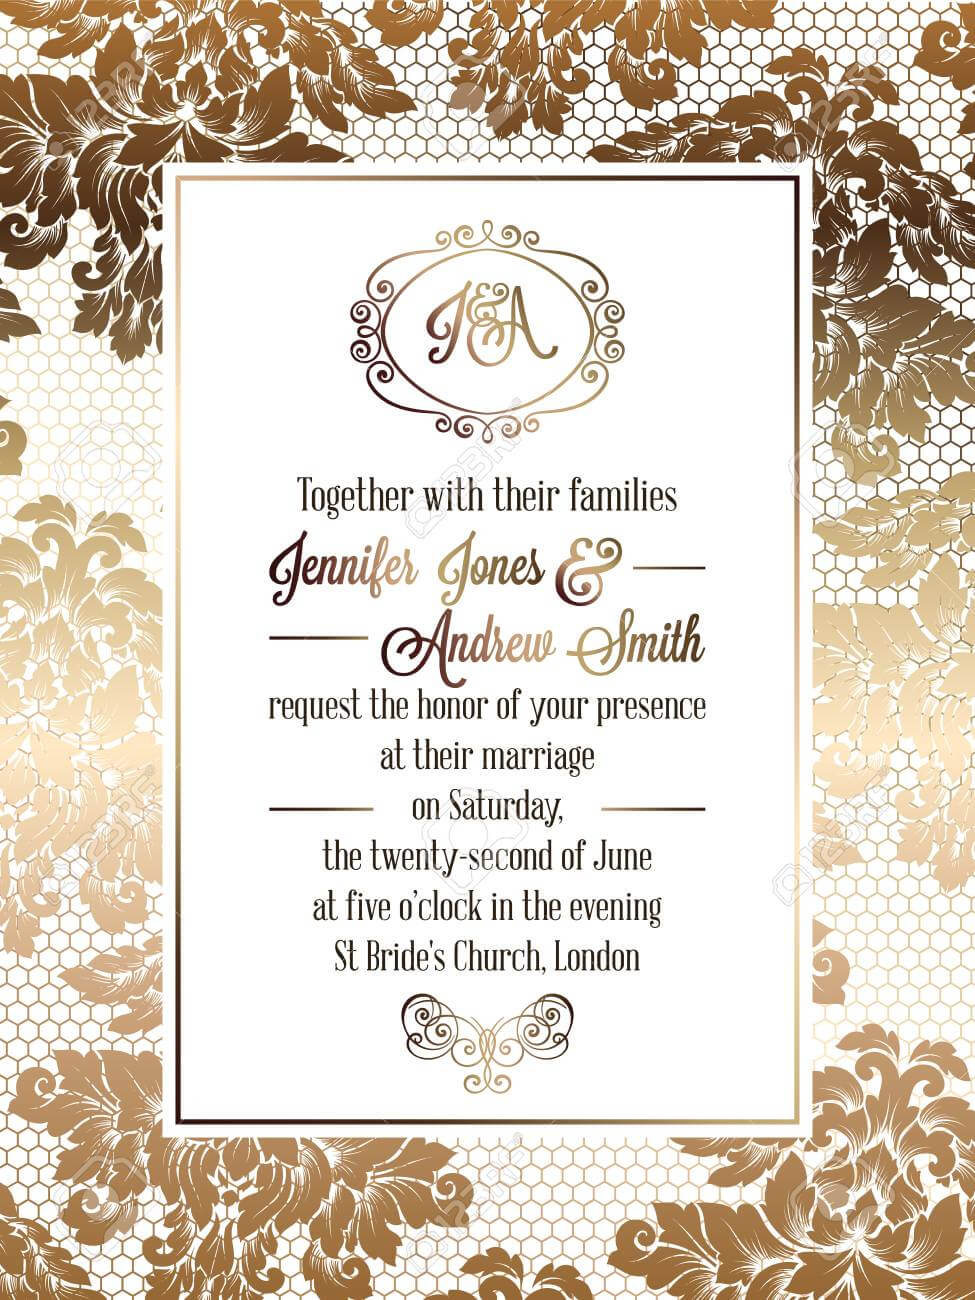 Vintage Baroque Style Wedding Invitation Card Template.. Elegant.. Within Invitation Cards Templates For Marriage